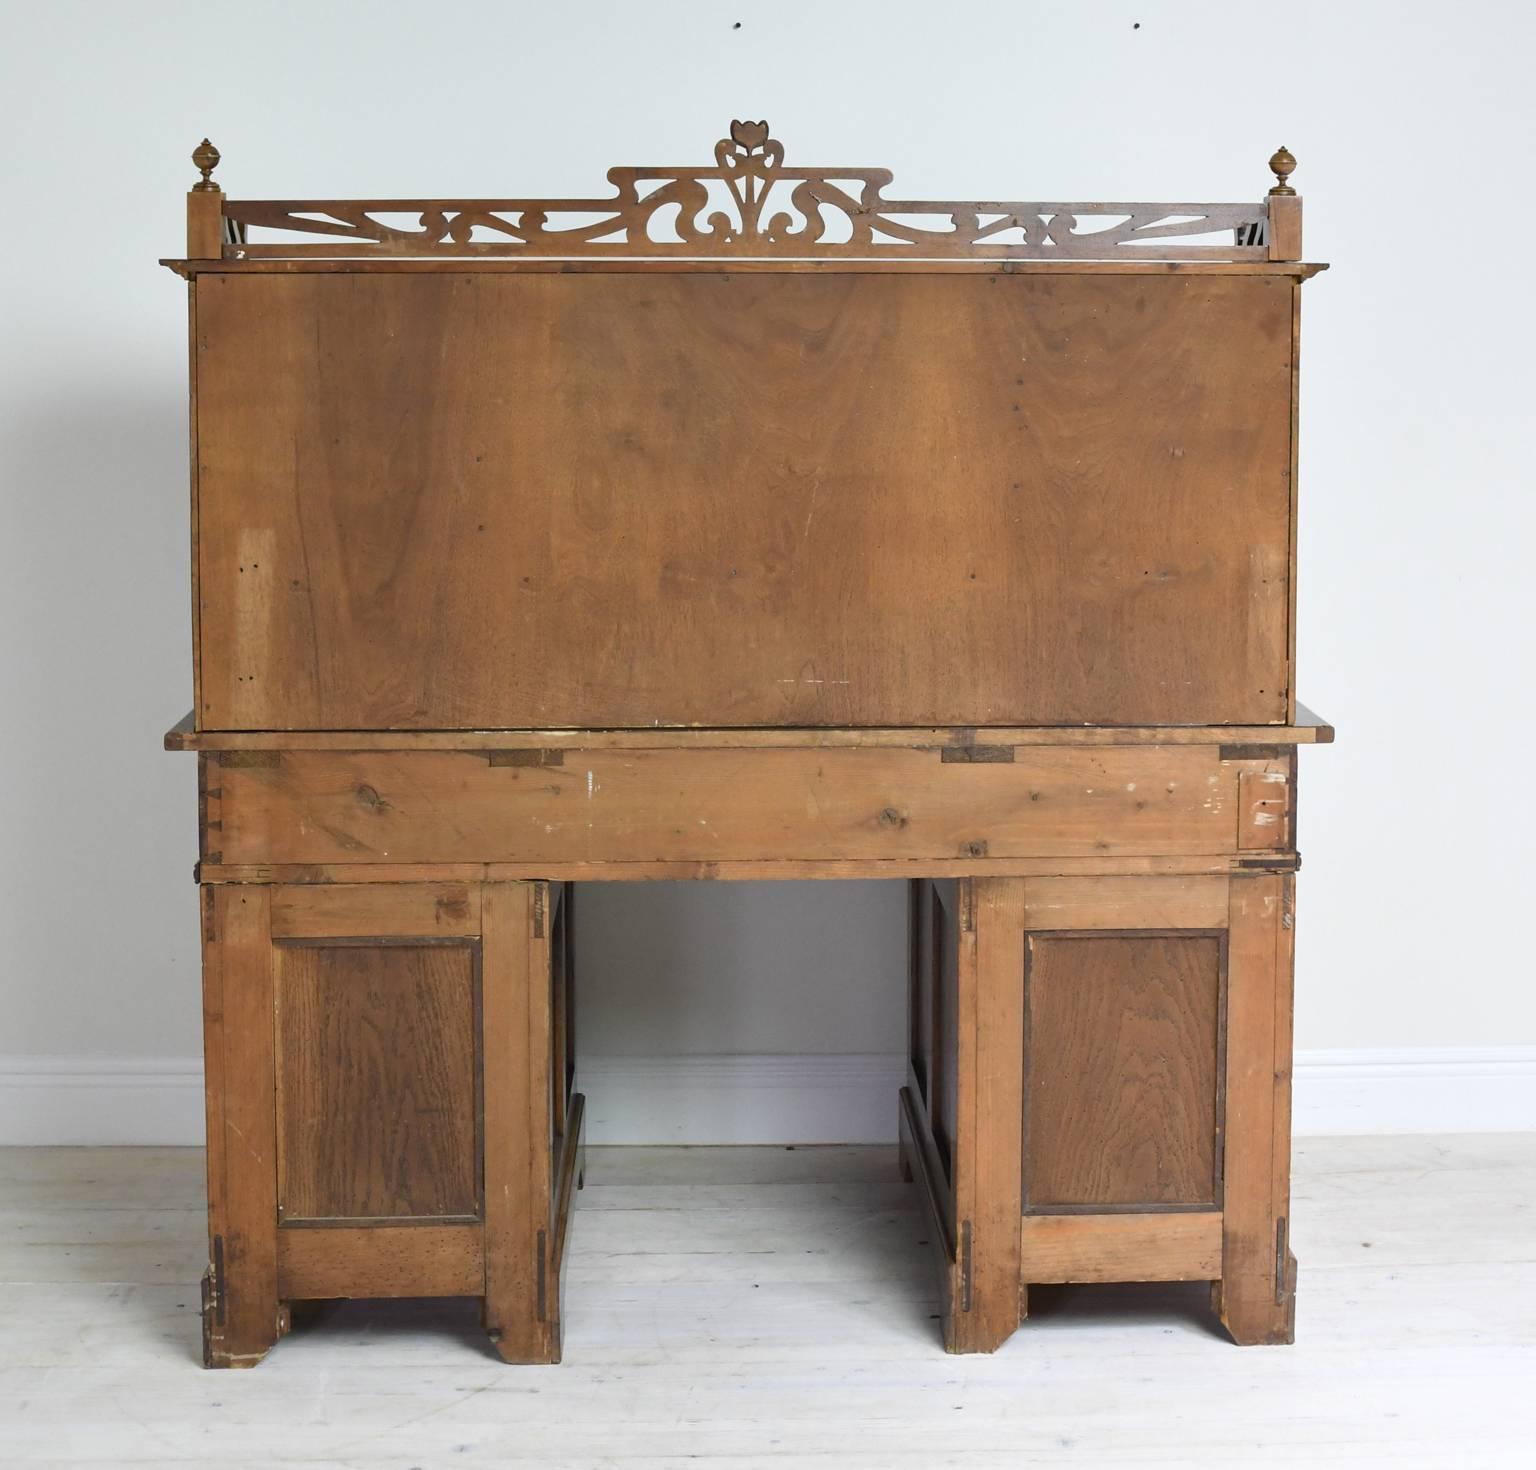 Early 20th Century Art Nouveau Walnut Pedestal Desk with Upper Cabinet and Stained Glass, C. 1900 For Sale